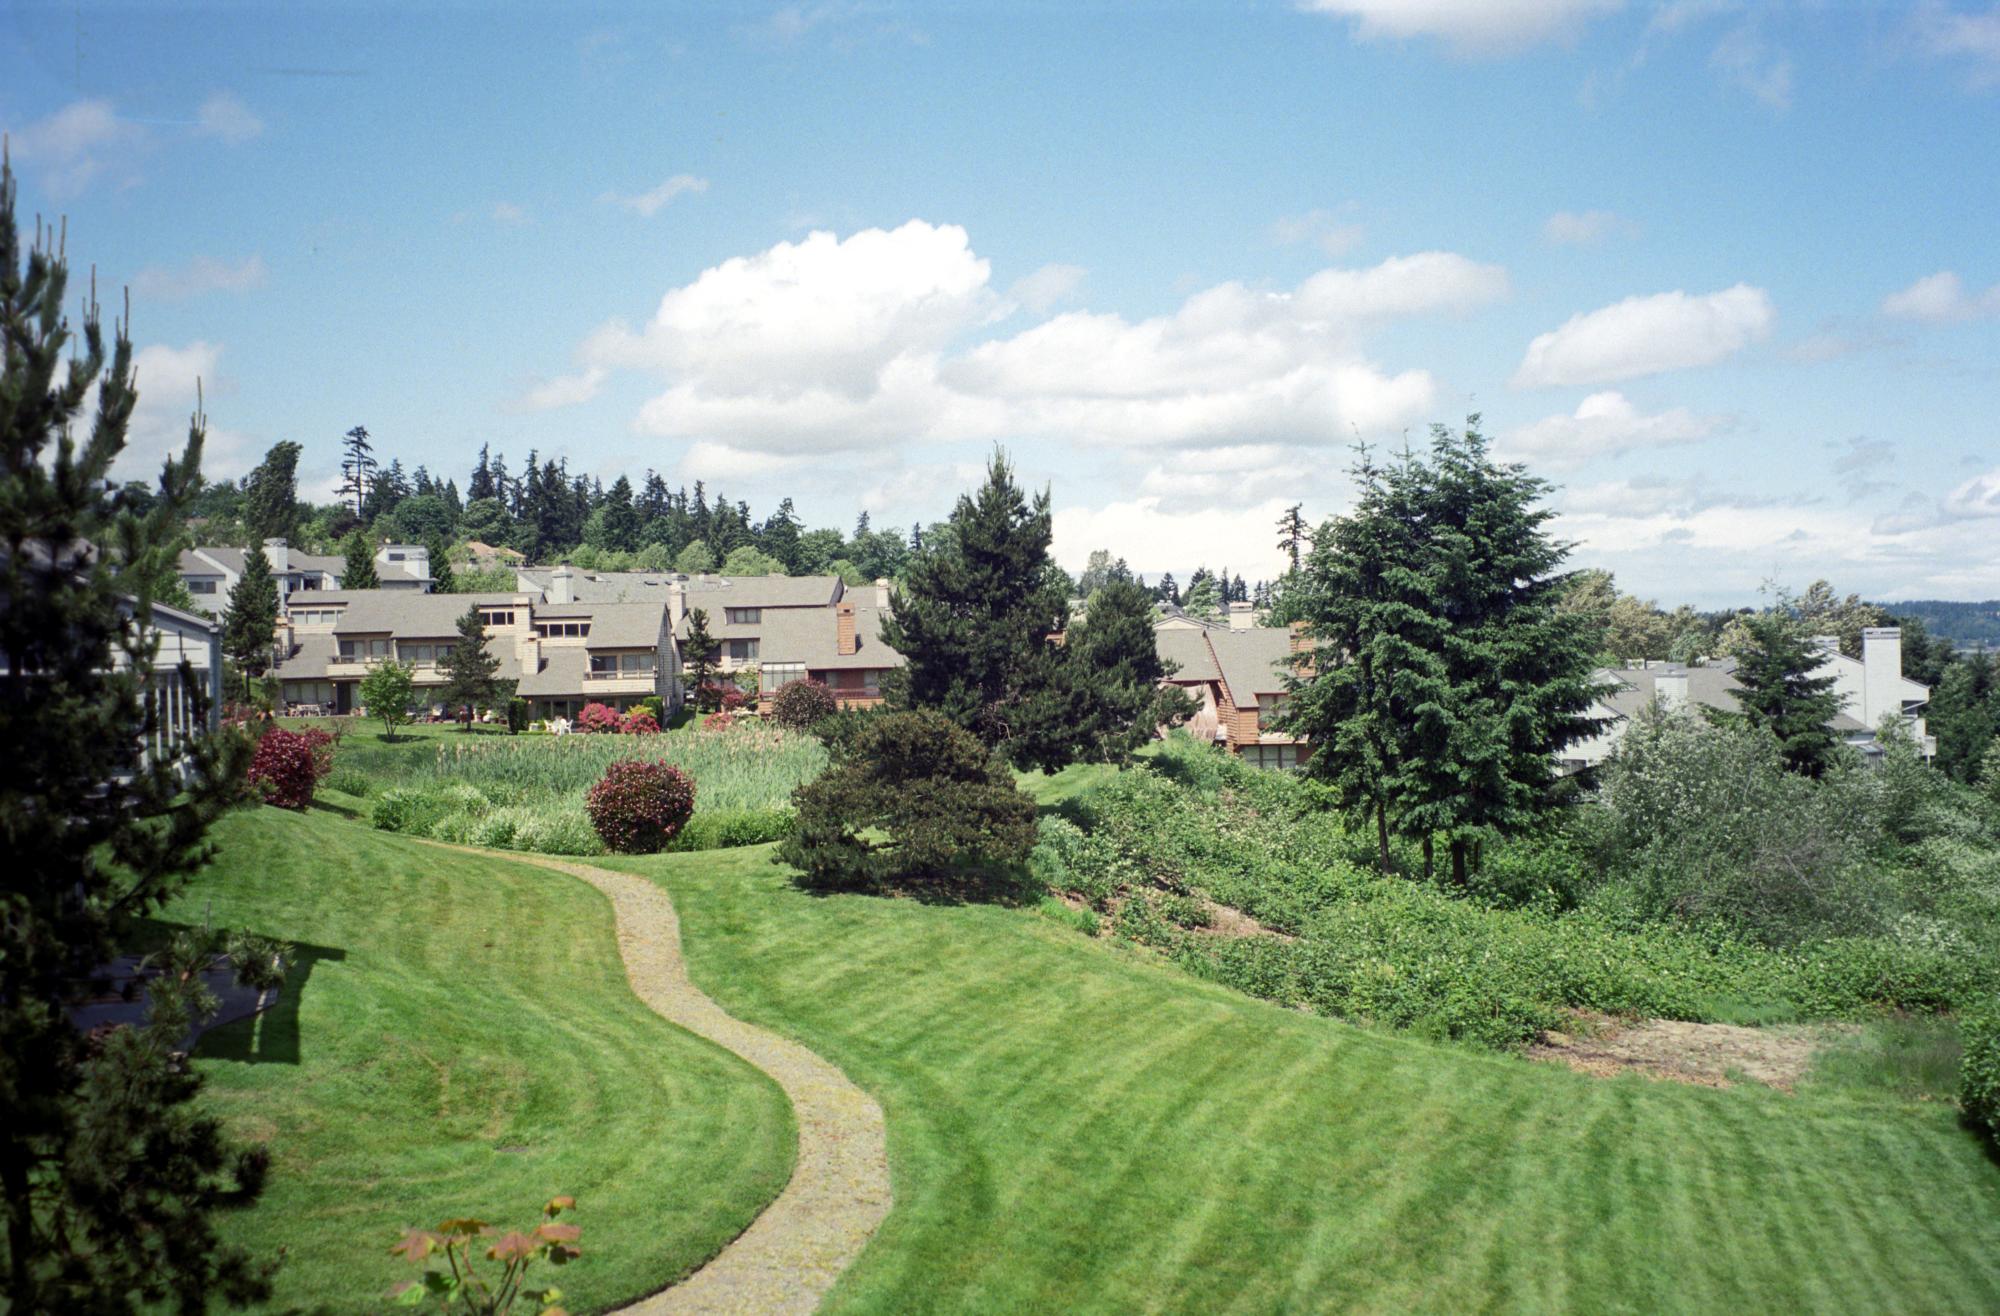 Seattle (2000) - View North